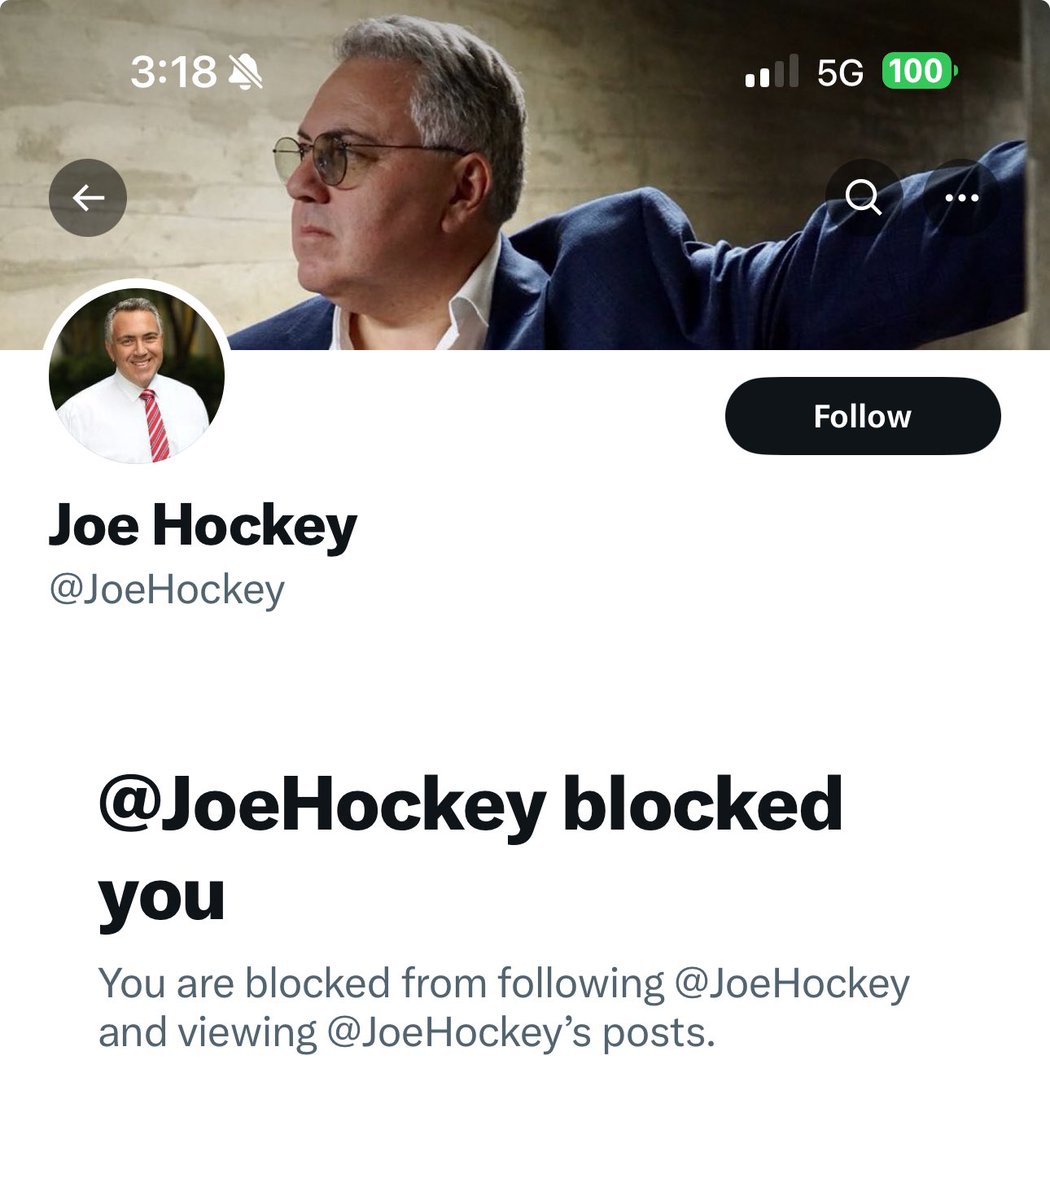 Oh no, @JoeHockey, was it something I said? 🙊 Well don’t I feel terrible now for hurting your feelings. #GoFuckYourselfAnyway #AusPol